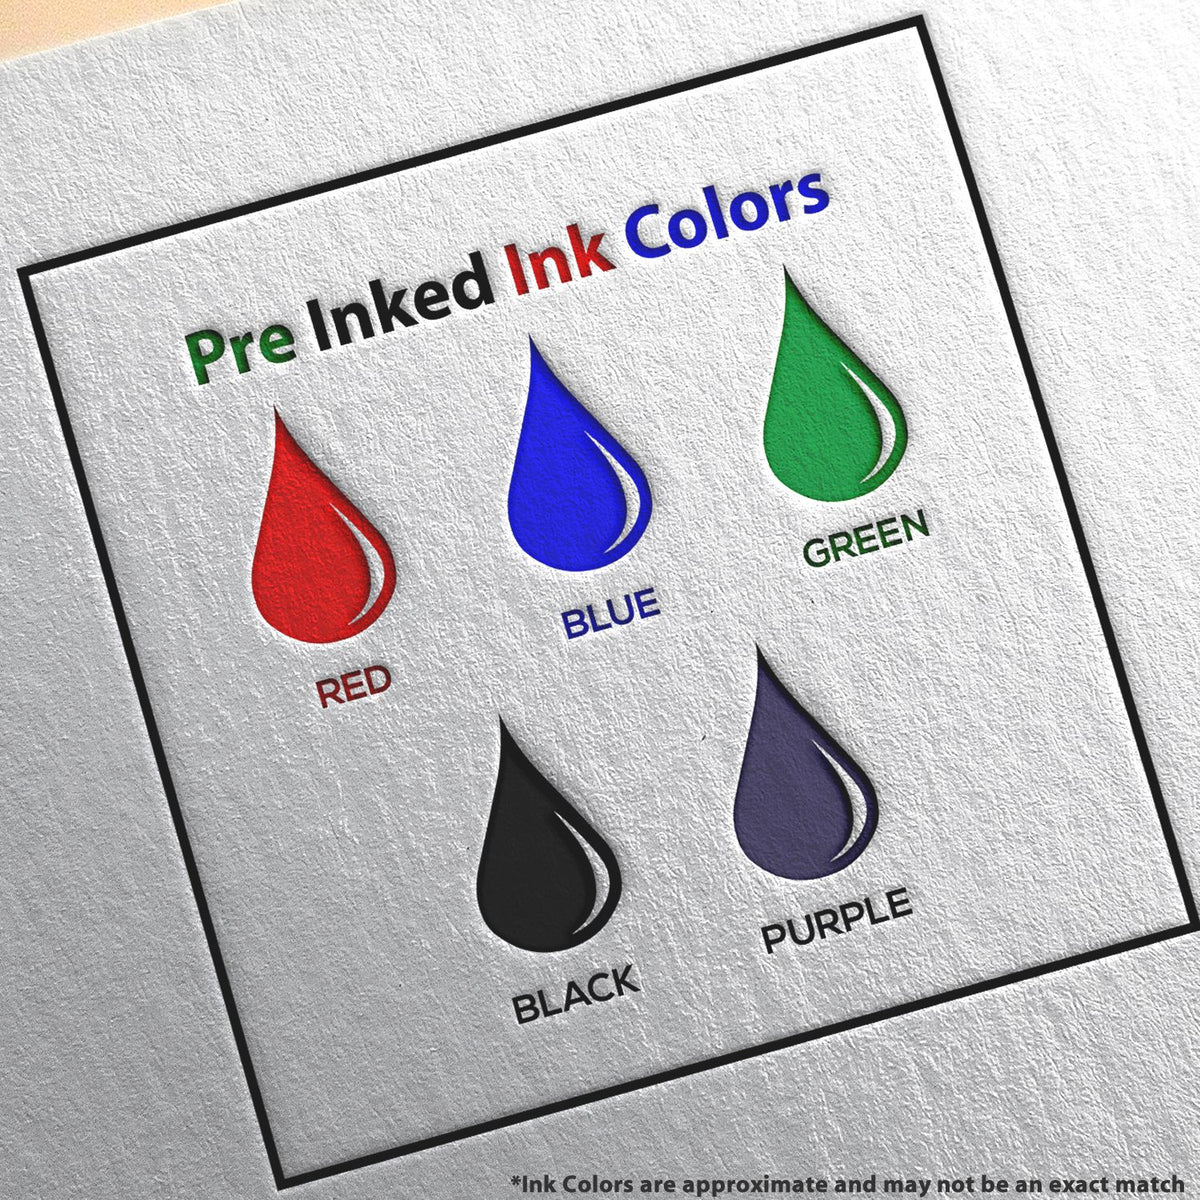 A picture showing the different ink colors or hues available for the Slim Pre-Inked North Dakota Landscape Architect Seal Stamp product.